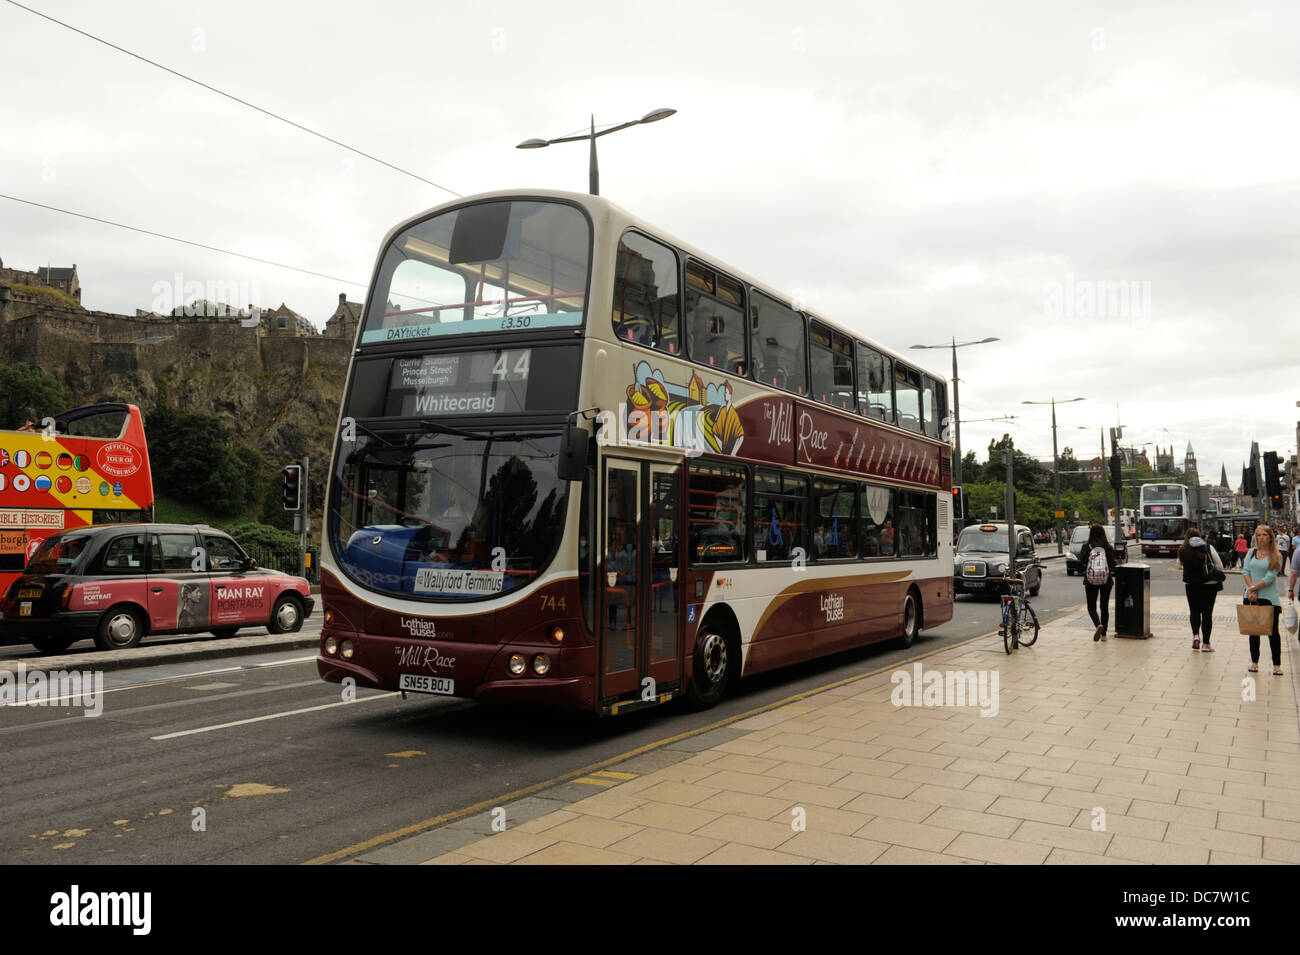 Lothian Buses, Edinburgh. The double decker bus pictured here on Princes Street Edinburgh where tram lines have been layed: Stock Photo